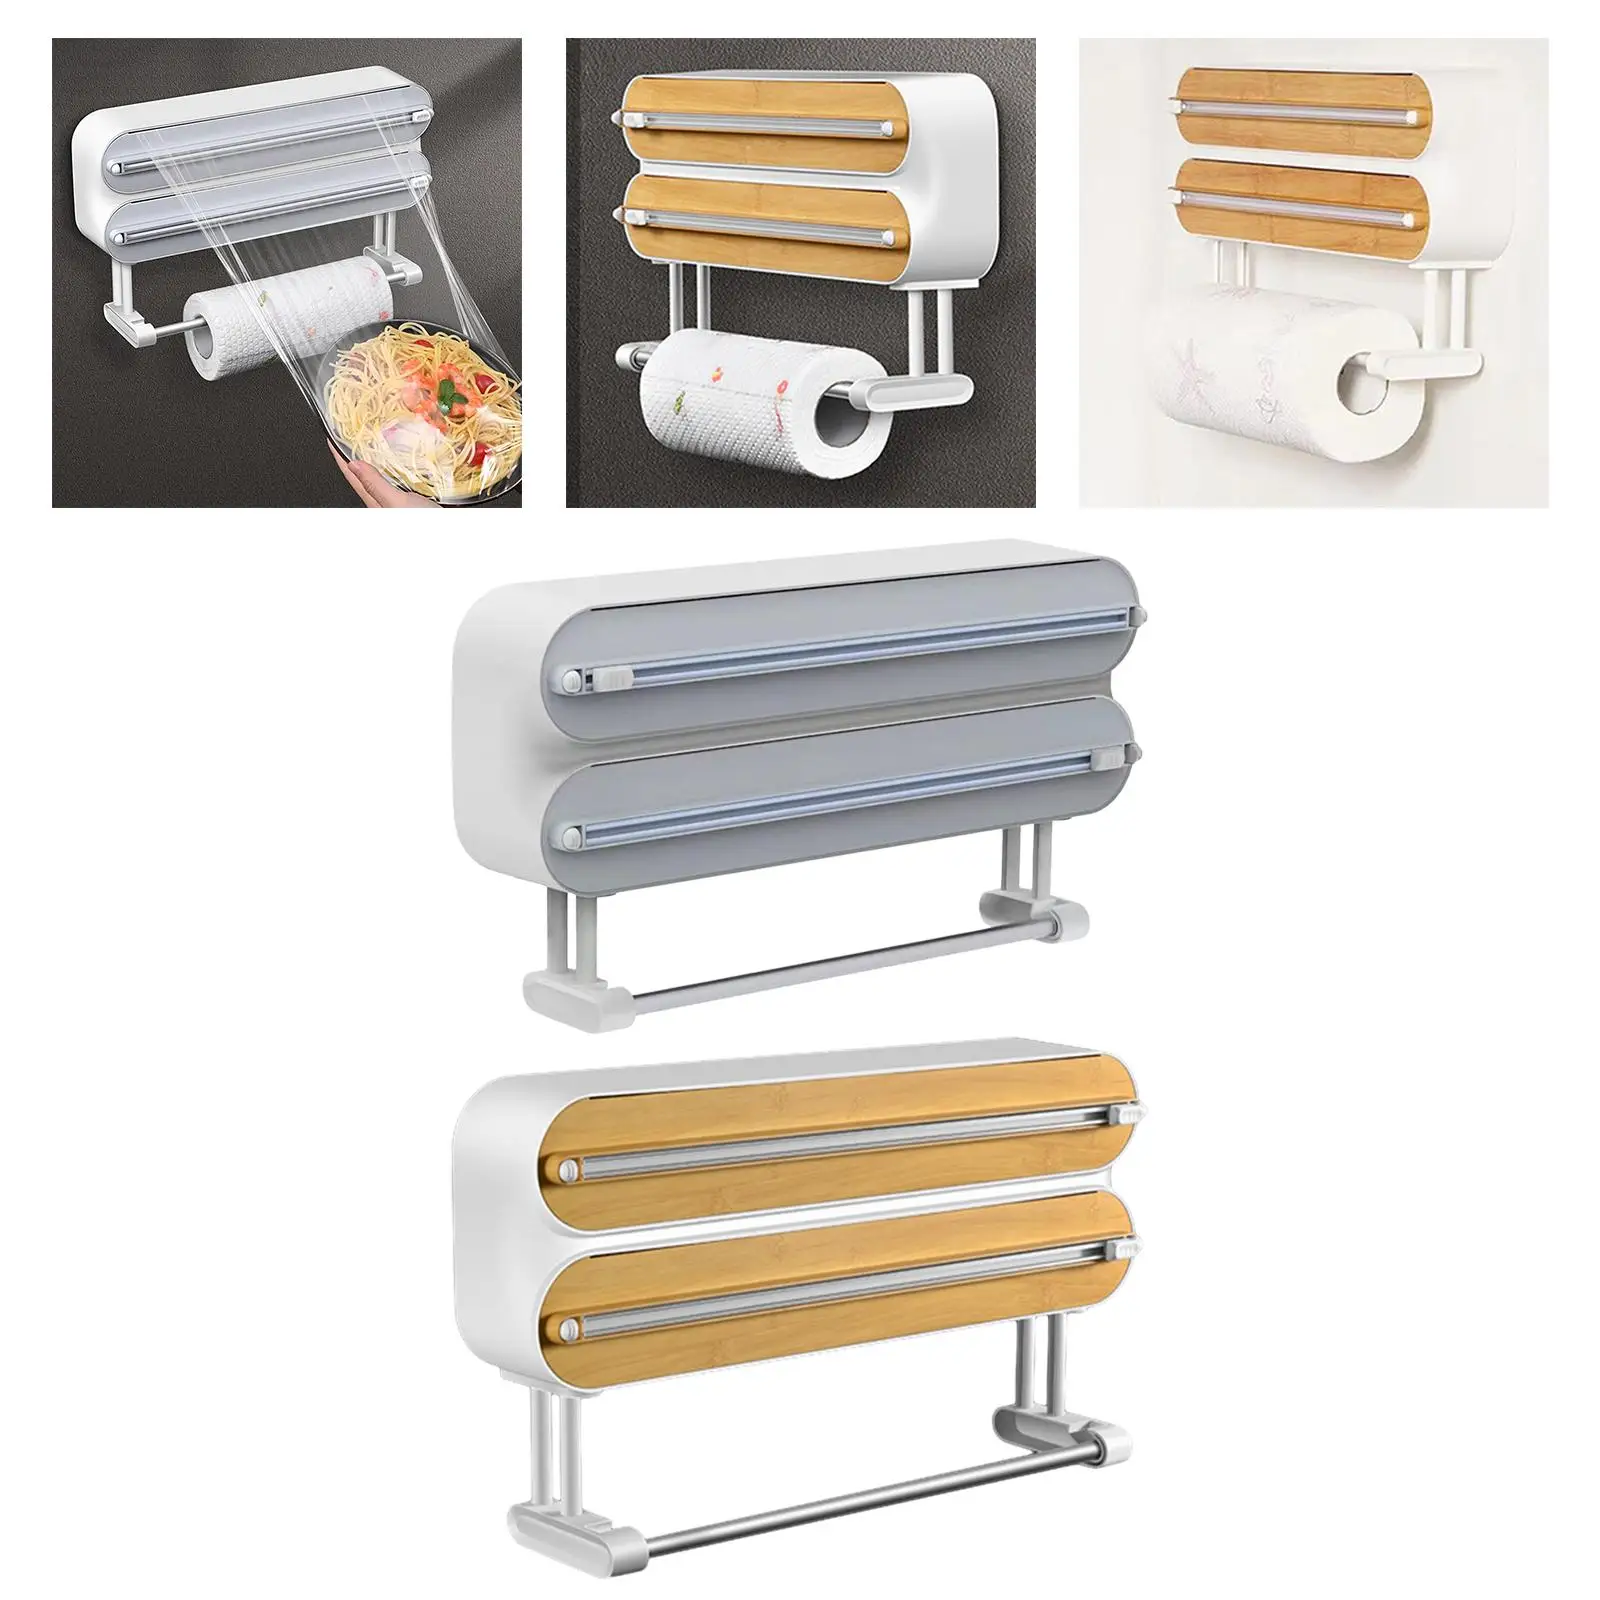 Cling Film Dispenser with Cutter Household Food Wrap Cutter Slide Cutter Smoothly Cutting Kitchen Roll Holder for Refrigerator